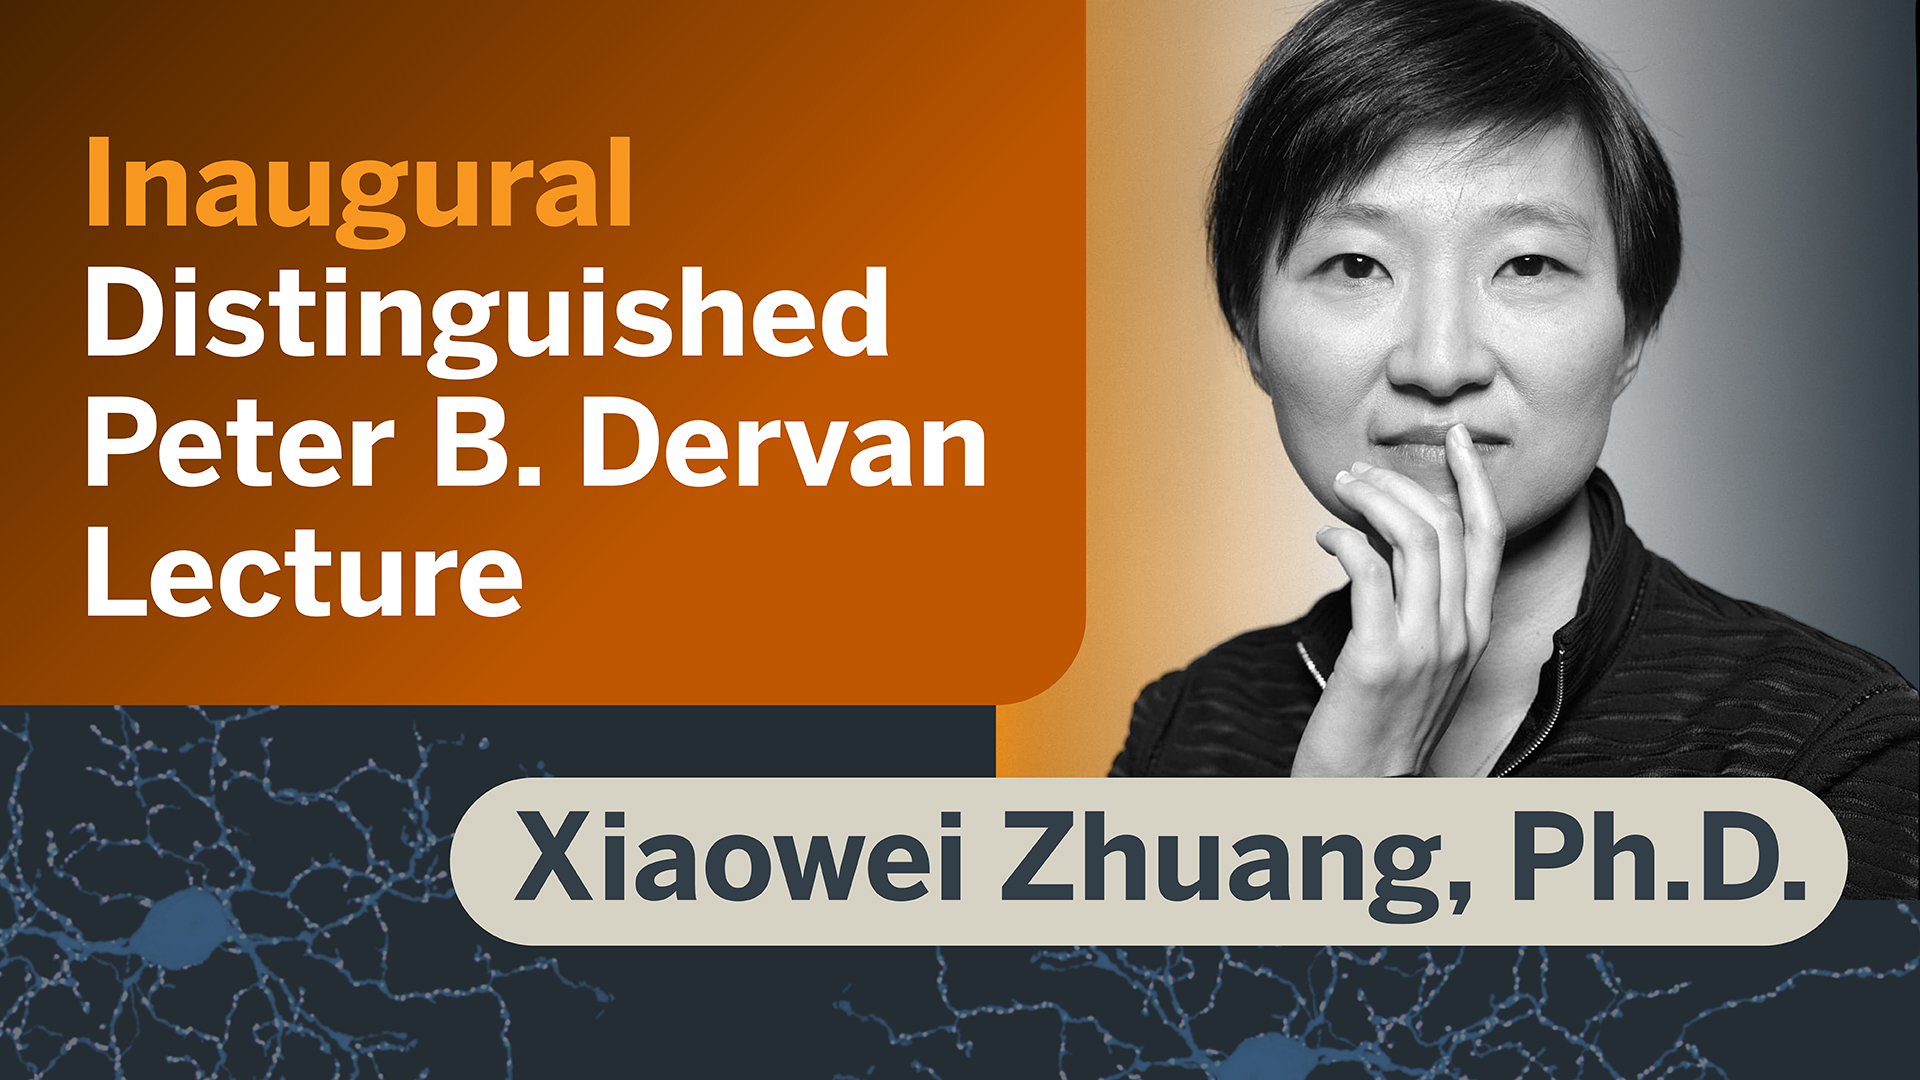 Ziaowei Zhuang, Ph.D. pictured with words Inaugural Distinguished Peter B. Dervan Lecture